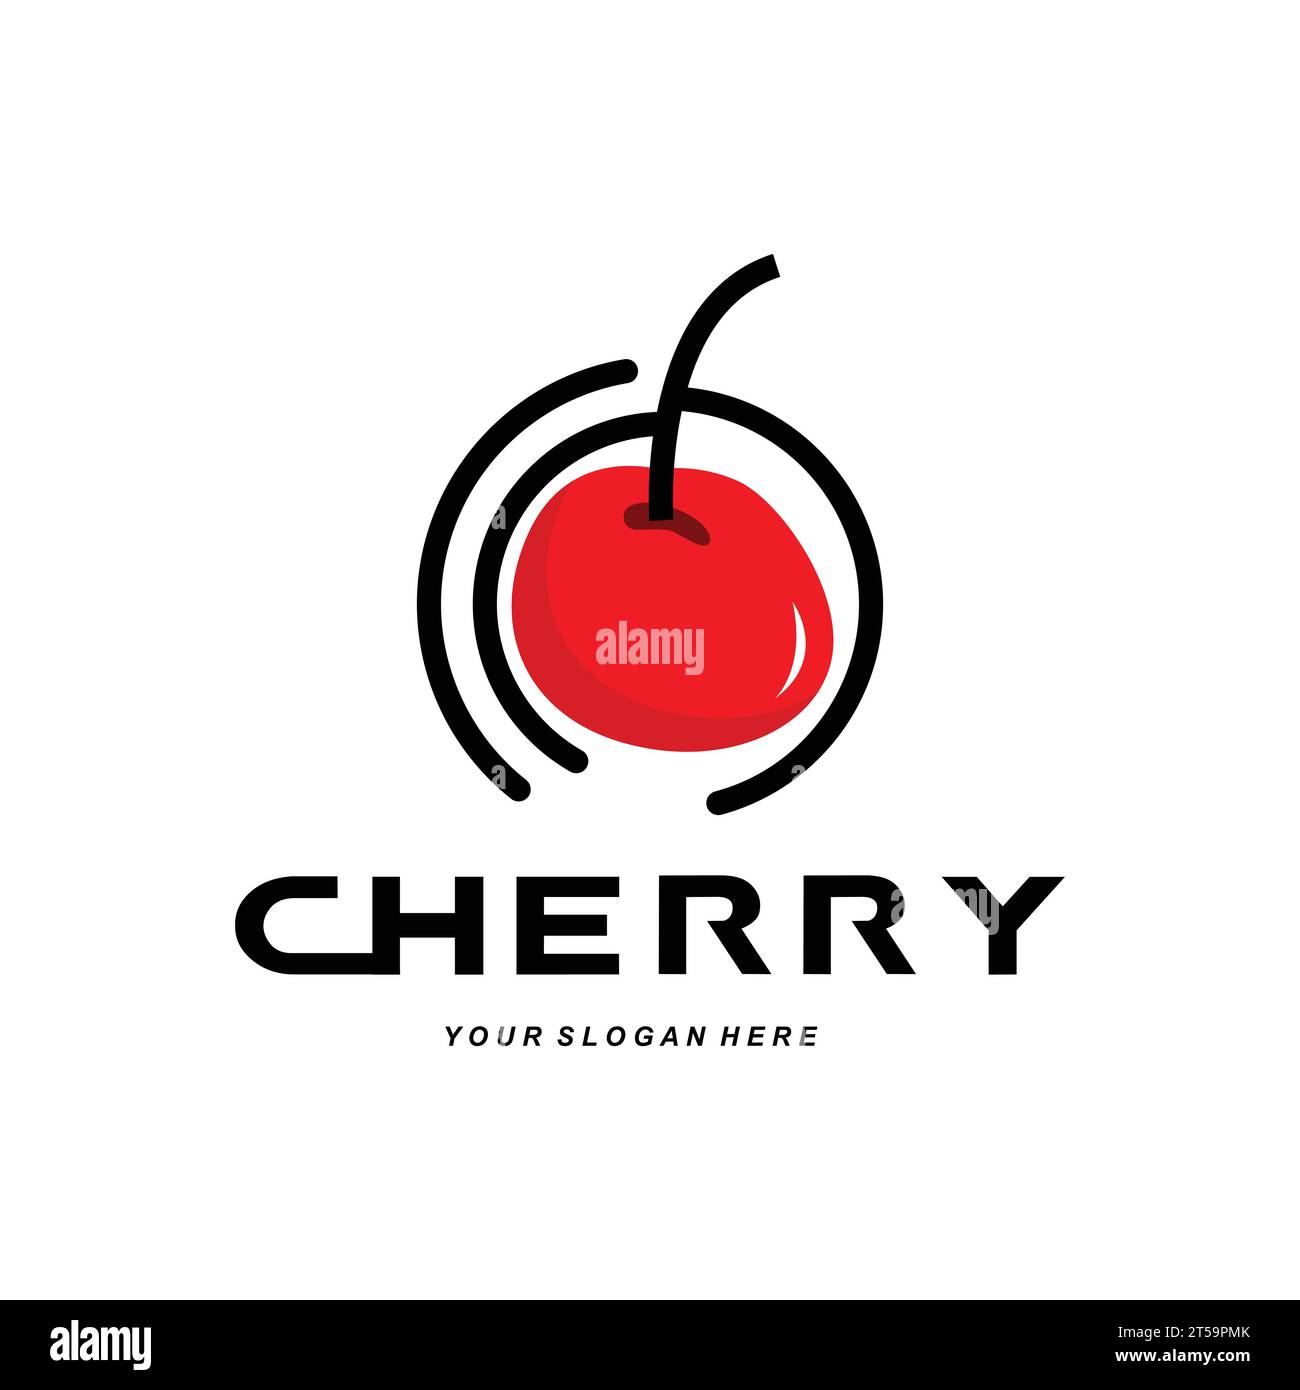 Cherry Fruit logo, Red Colored plant vector illustration, Fruit Shop Design, Company, Sticker, Product Brand Stock Vector